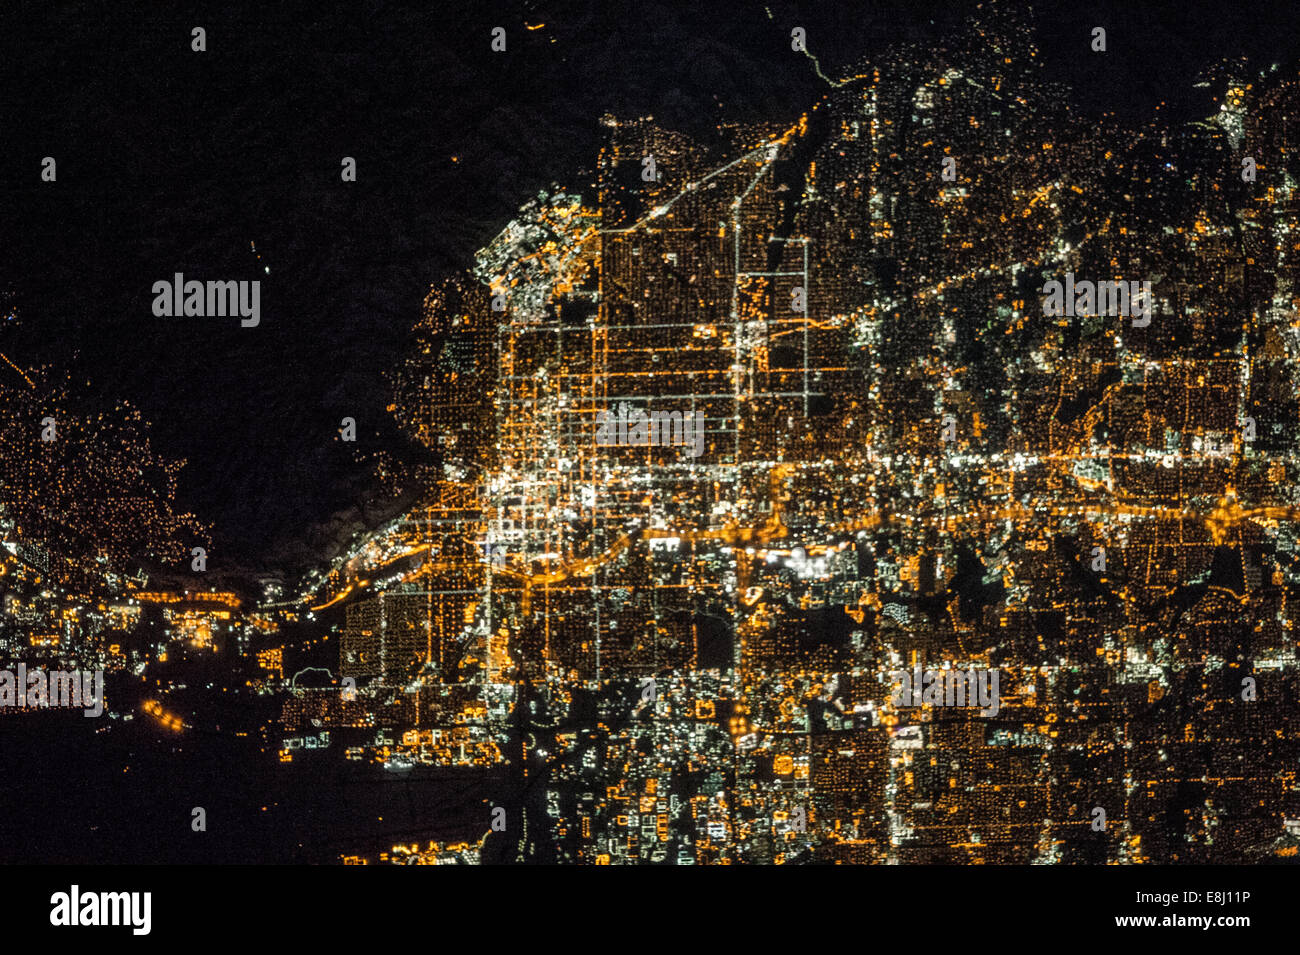 The Salt Lake City metropolitan area is located along the western front of the Wasatch Range in northern Utah. Viewed at night f Stock Photo